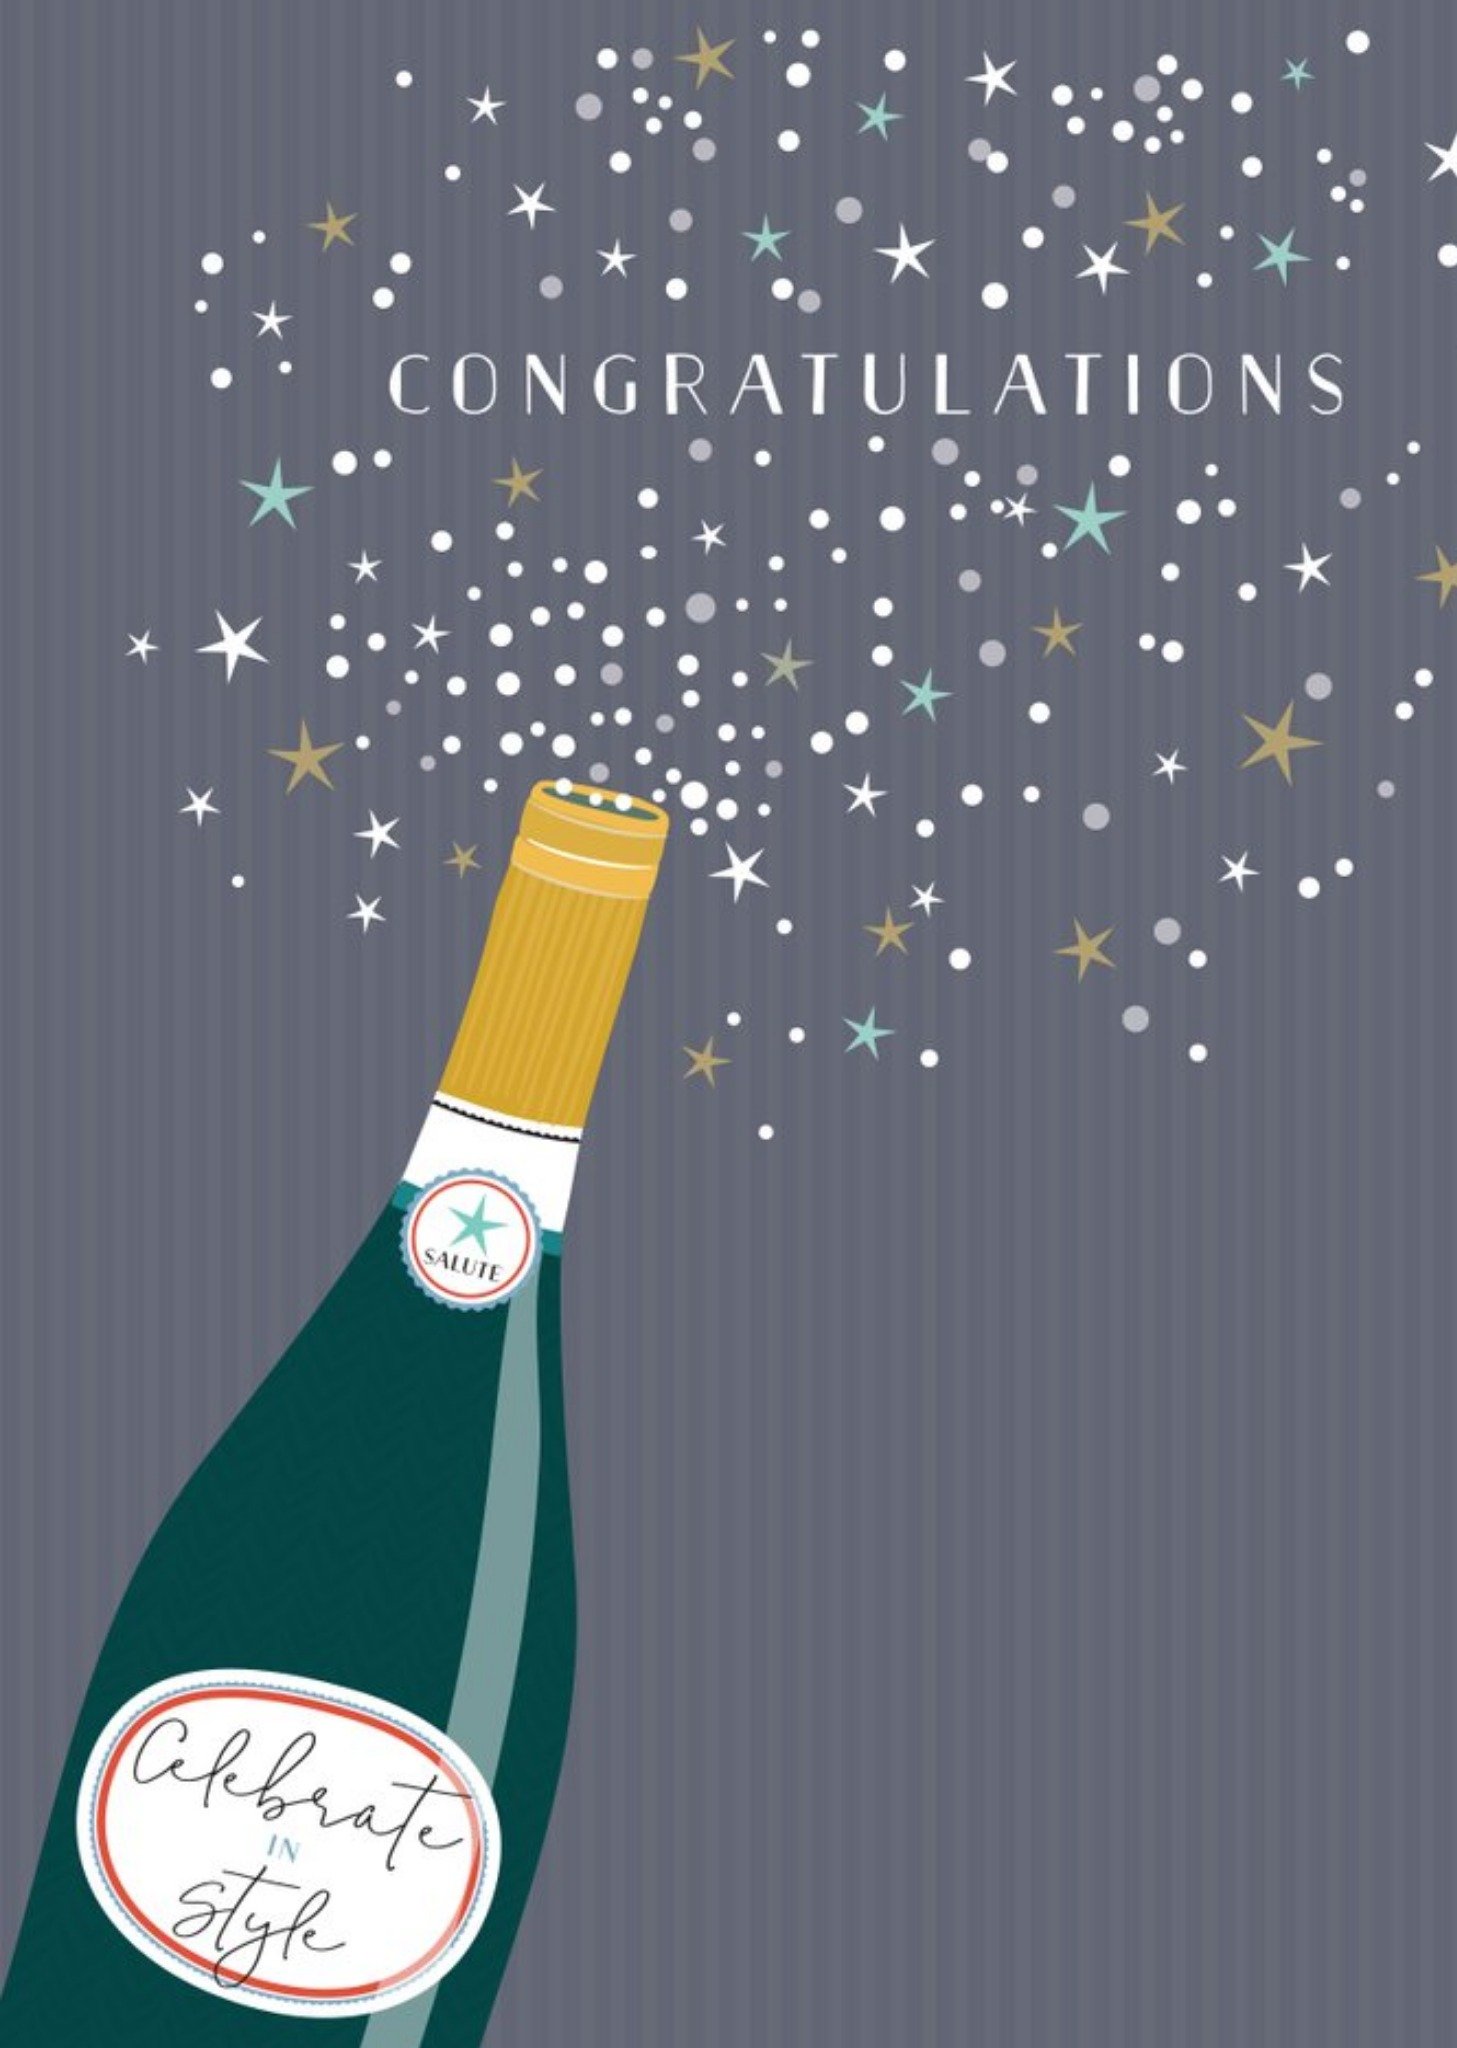 Moonpig Illustrated Champagne Bottle Congratulations Card Ecard